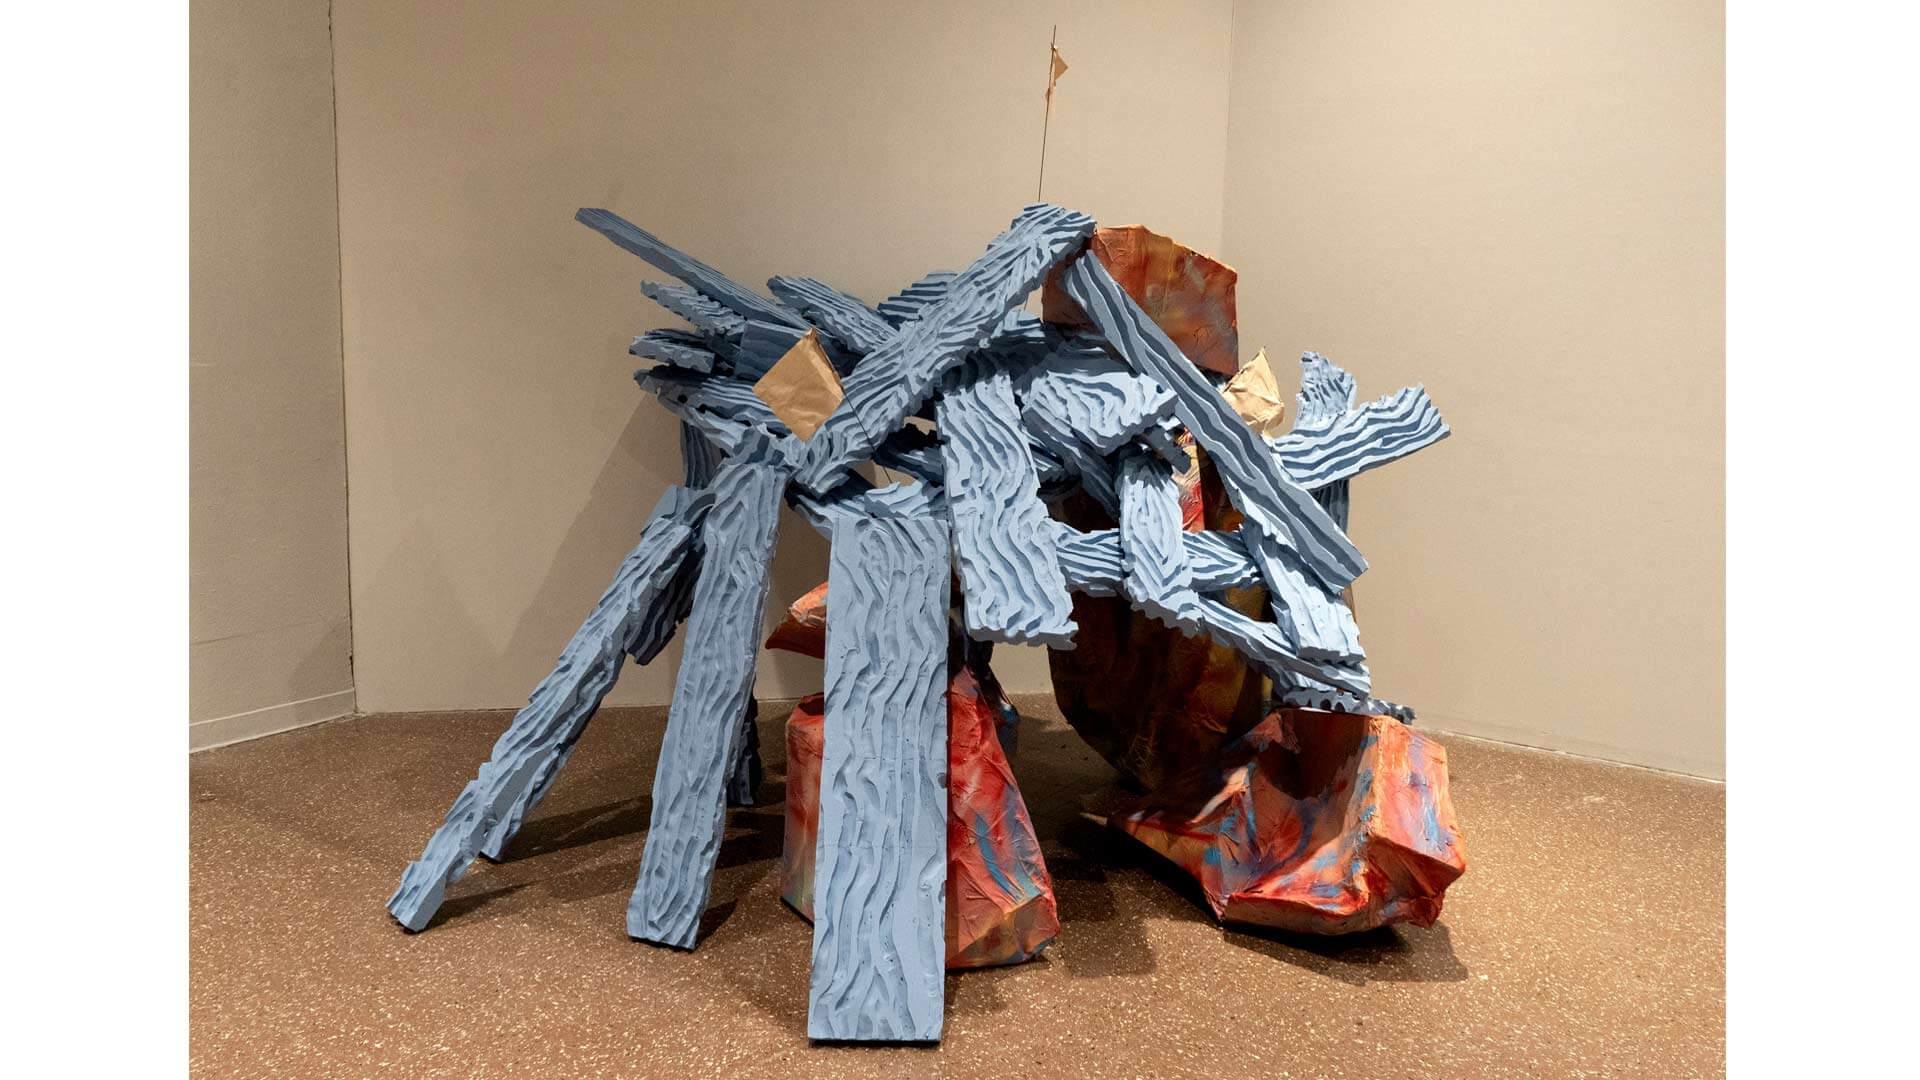 “Transition/Resurrection,” a playful foam and cardboard structure